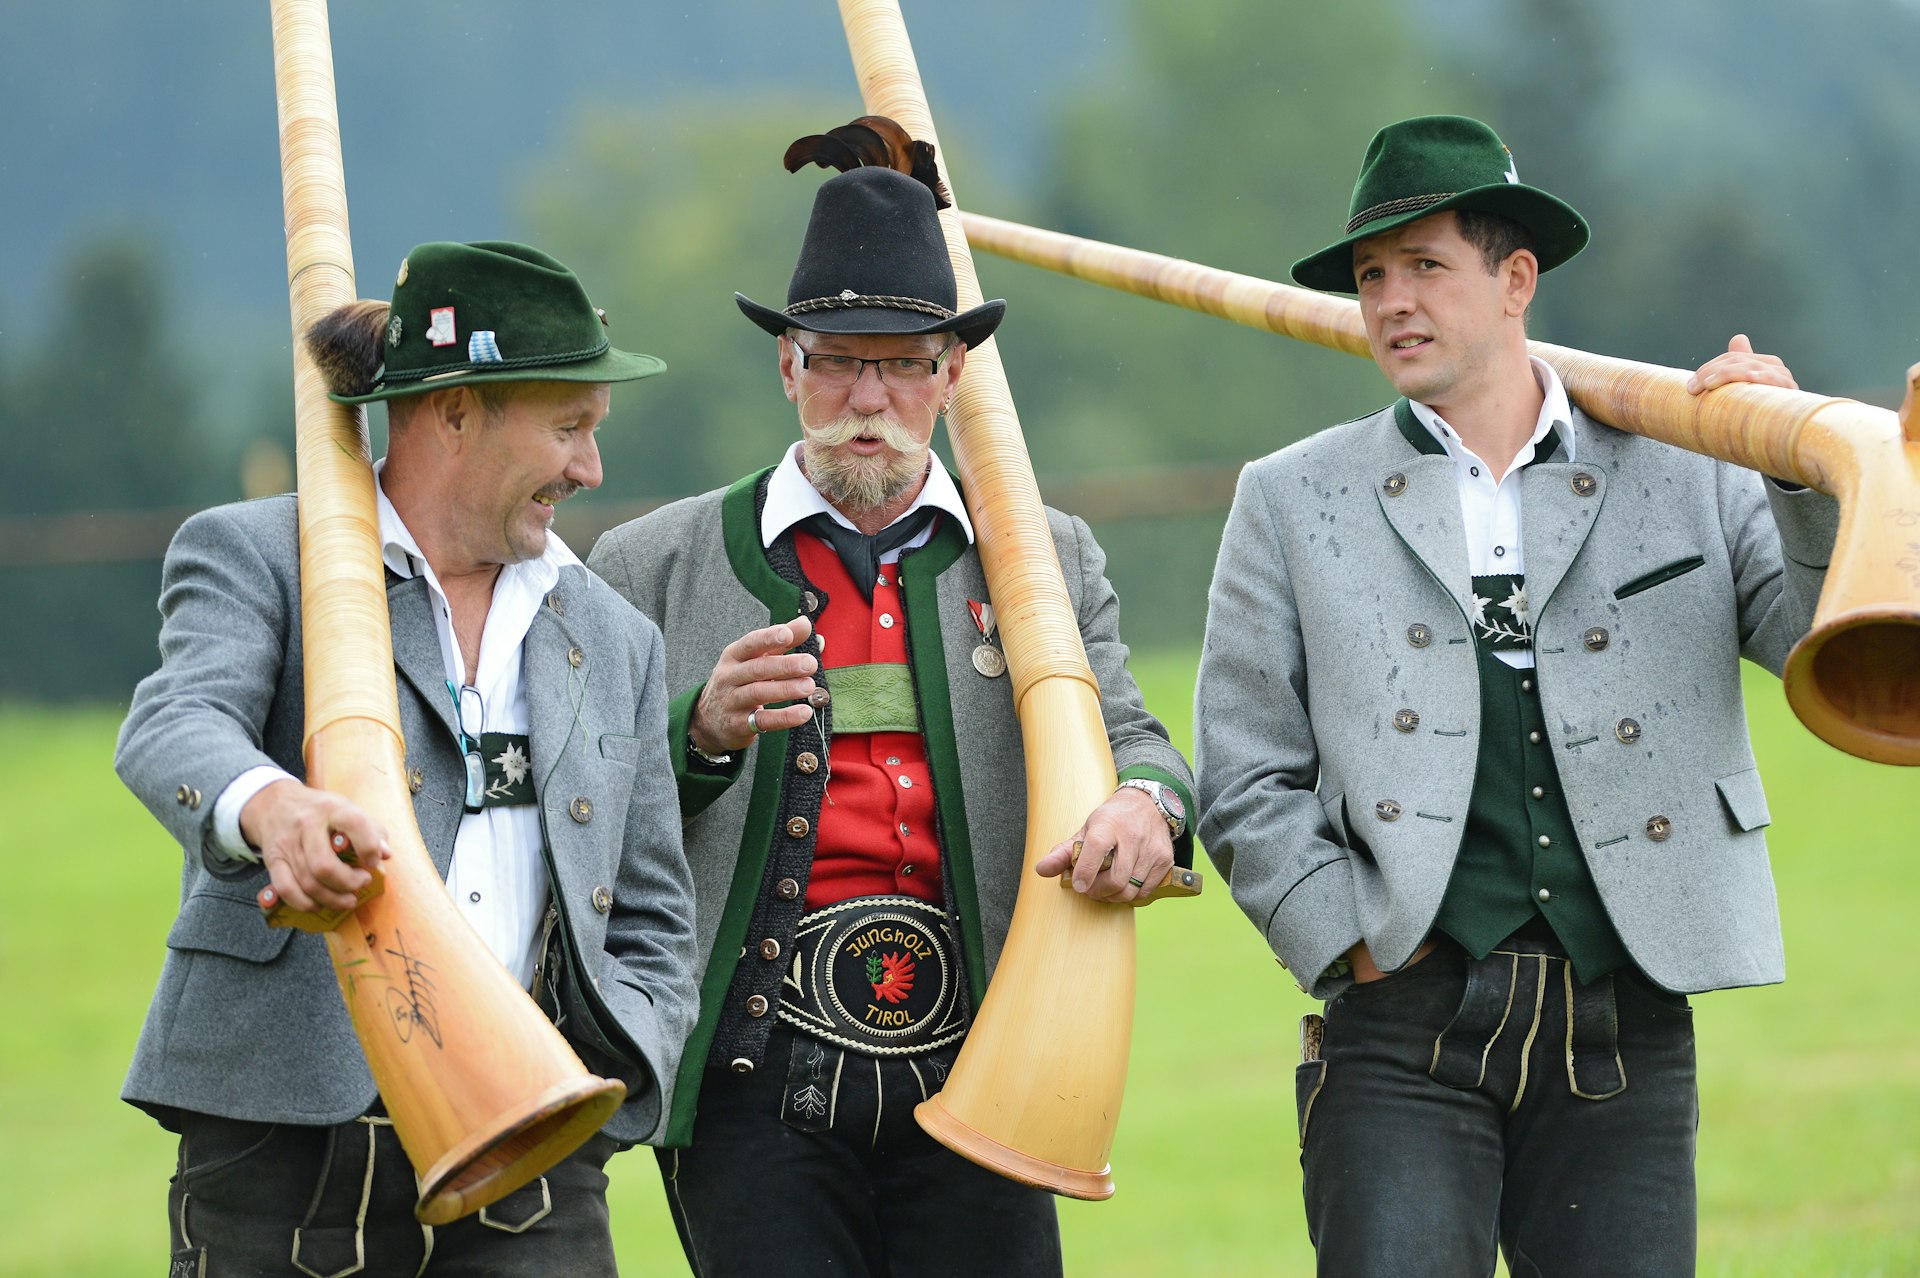 Three Alphorn blowers walk down a hill with their instruments after their performance at the Alphorn blowers meeting in Weiler-Simmerberg